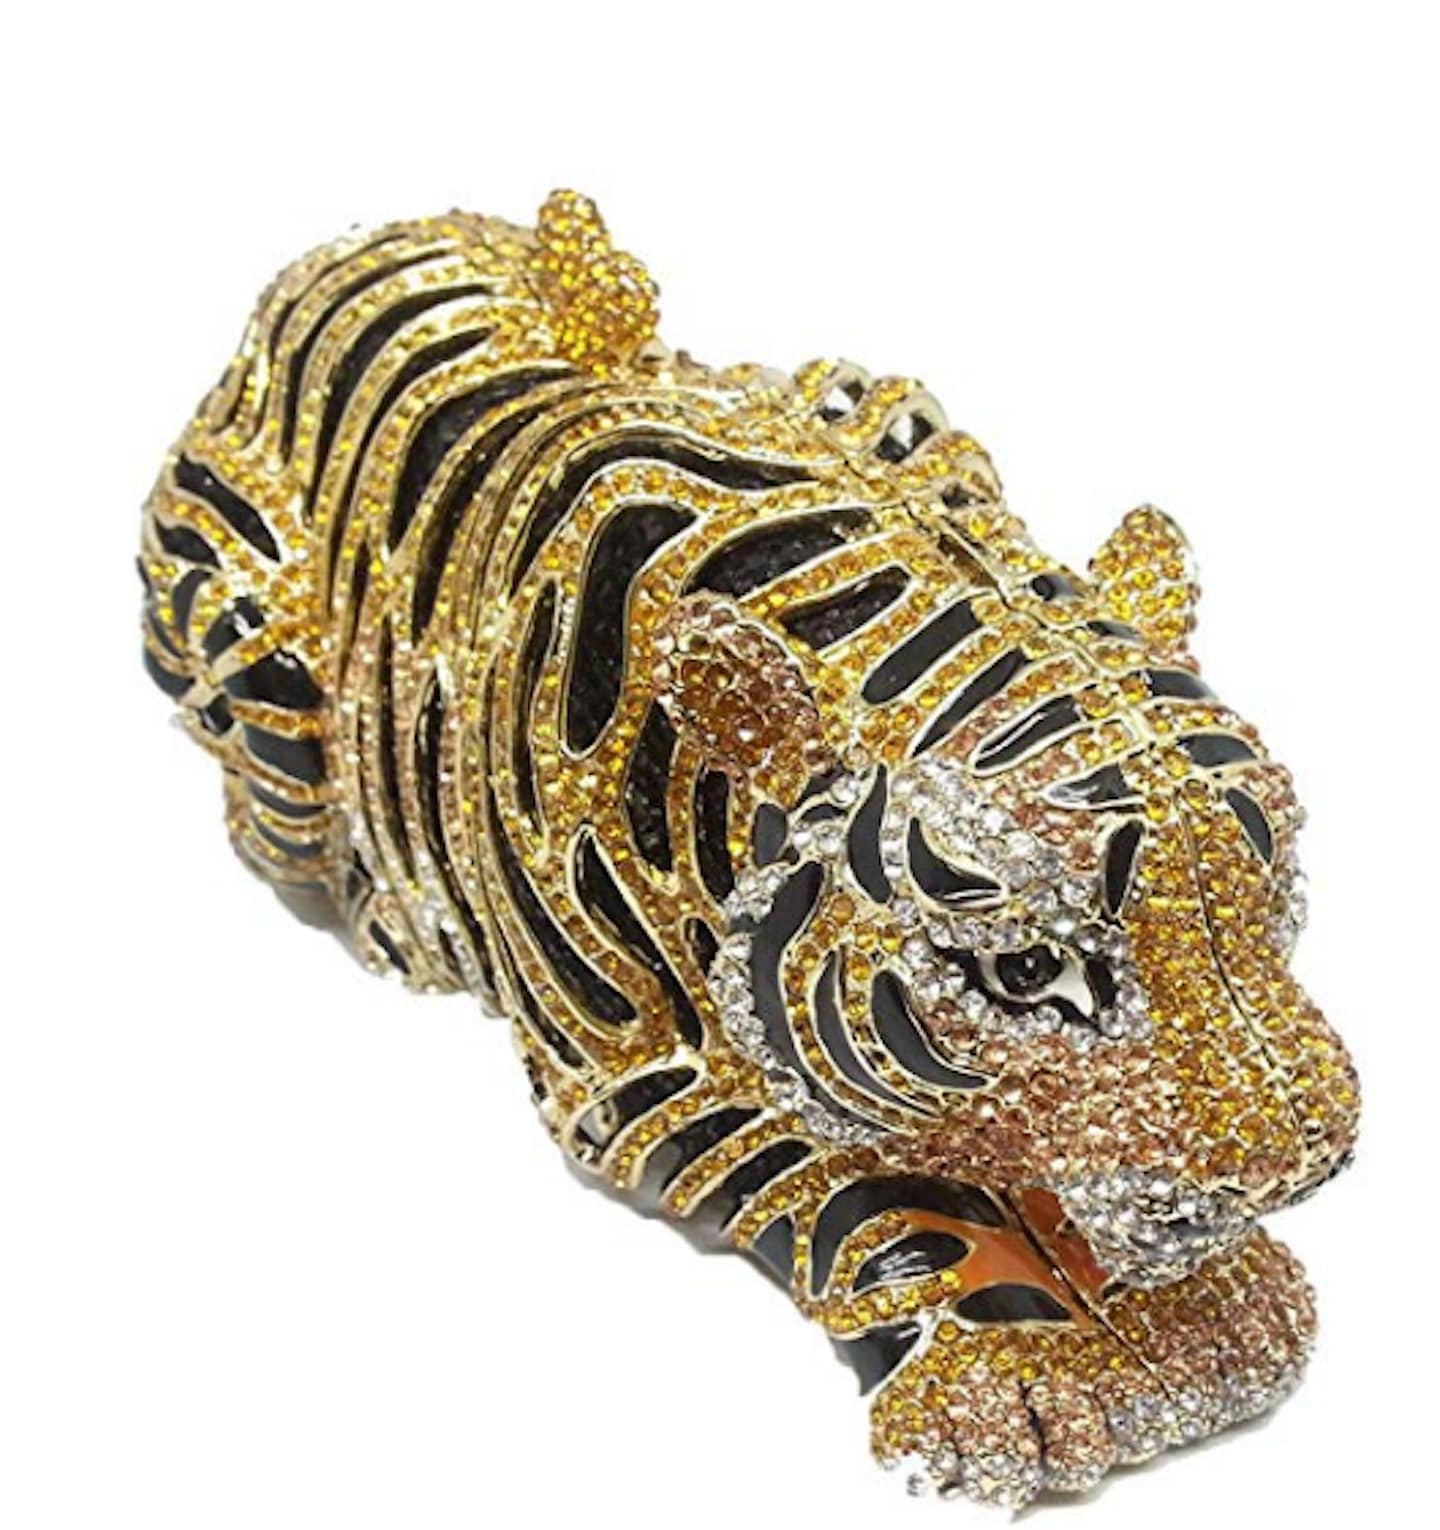 CRL1001941 - Evening bag, clutch bag - High Jewellery Tiger bag in blue  silk satin embroidered with gold. Animal that may be transformed into a  brooch, yellow